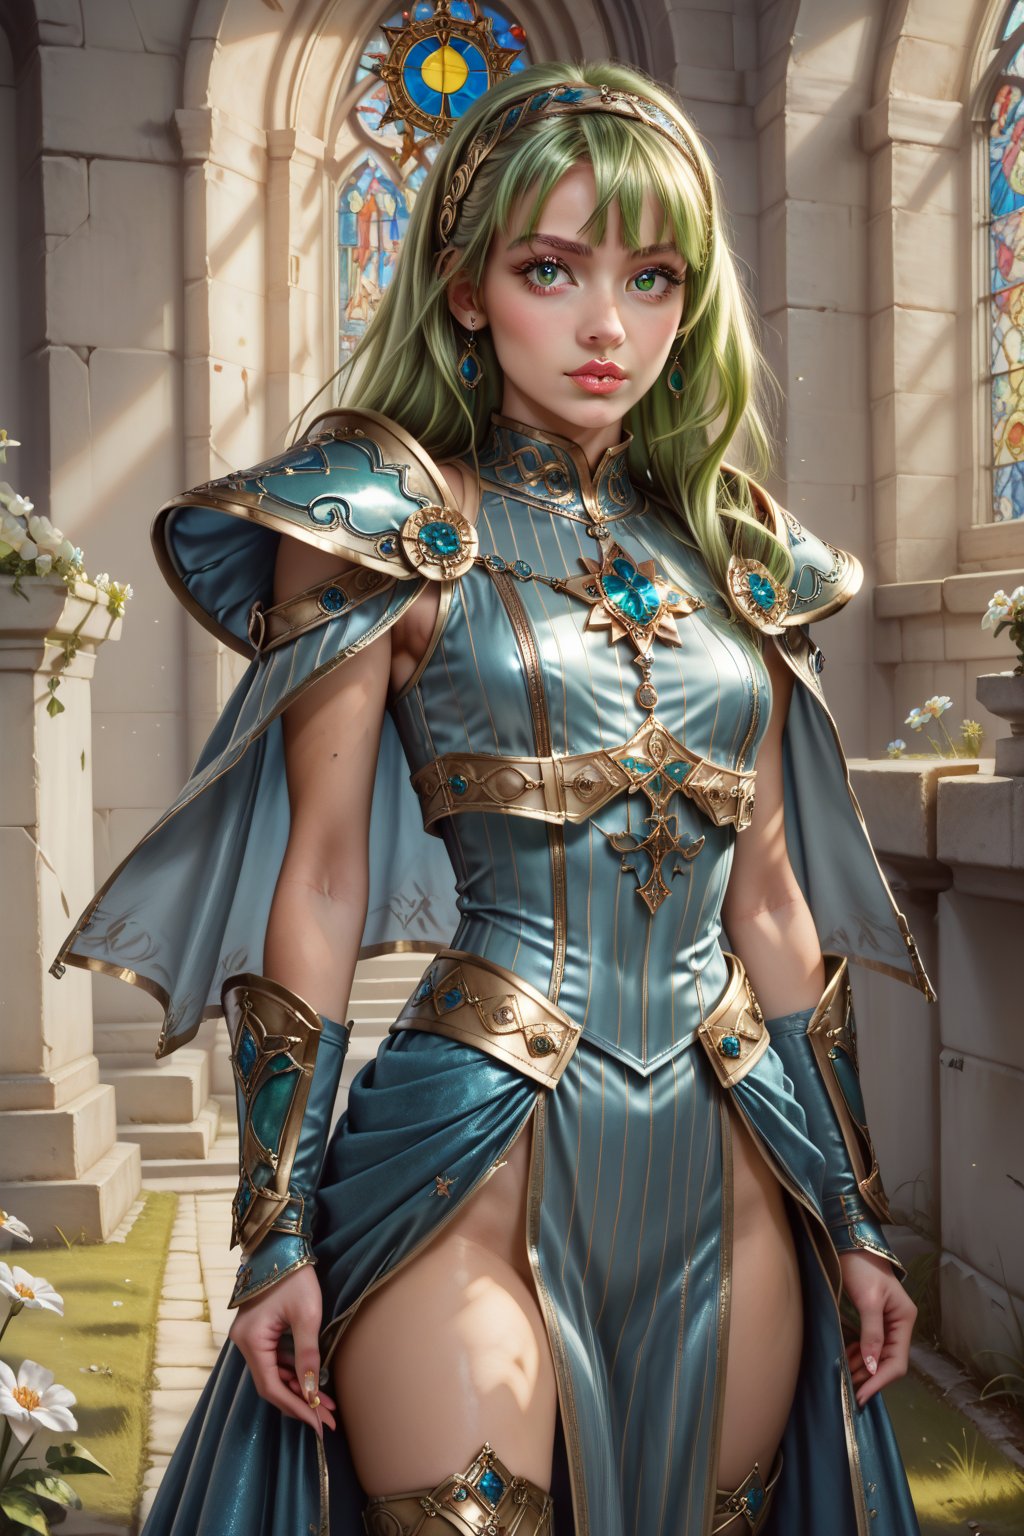 score_9, score_8_up, score_8, masterpiece, official art, ((ultra detailed)), (ultra quality), high quality, perfect face, 1 girl with long hair, blond-green hair with bangs, bronze eyes, detailed face, wearing a fancy ornate (((folk dress))), shoulder armor, armor, glove, hairband, hair accessories, striped, holding the great weapon, jewelery, thighhighs, pauldrons, side slit, capelet, vertical stripes, looking at viewer, fantastical and ethereal scenery, daytime, church, grass, flowers. Intricate details, extremely detailed, incredible details, full colored, complex details, hyper maximalist, detailed decoration, detailed lines, best quality, HDR, dynamic lighting, perfect anatomy, realistic, more detail, Architectur , full juicy lips, perfect green eyes, (soft cute face)